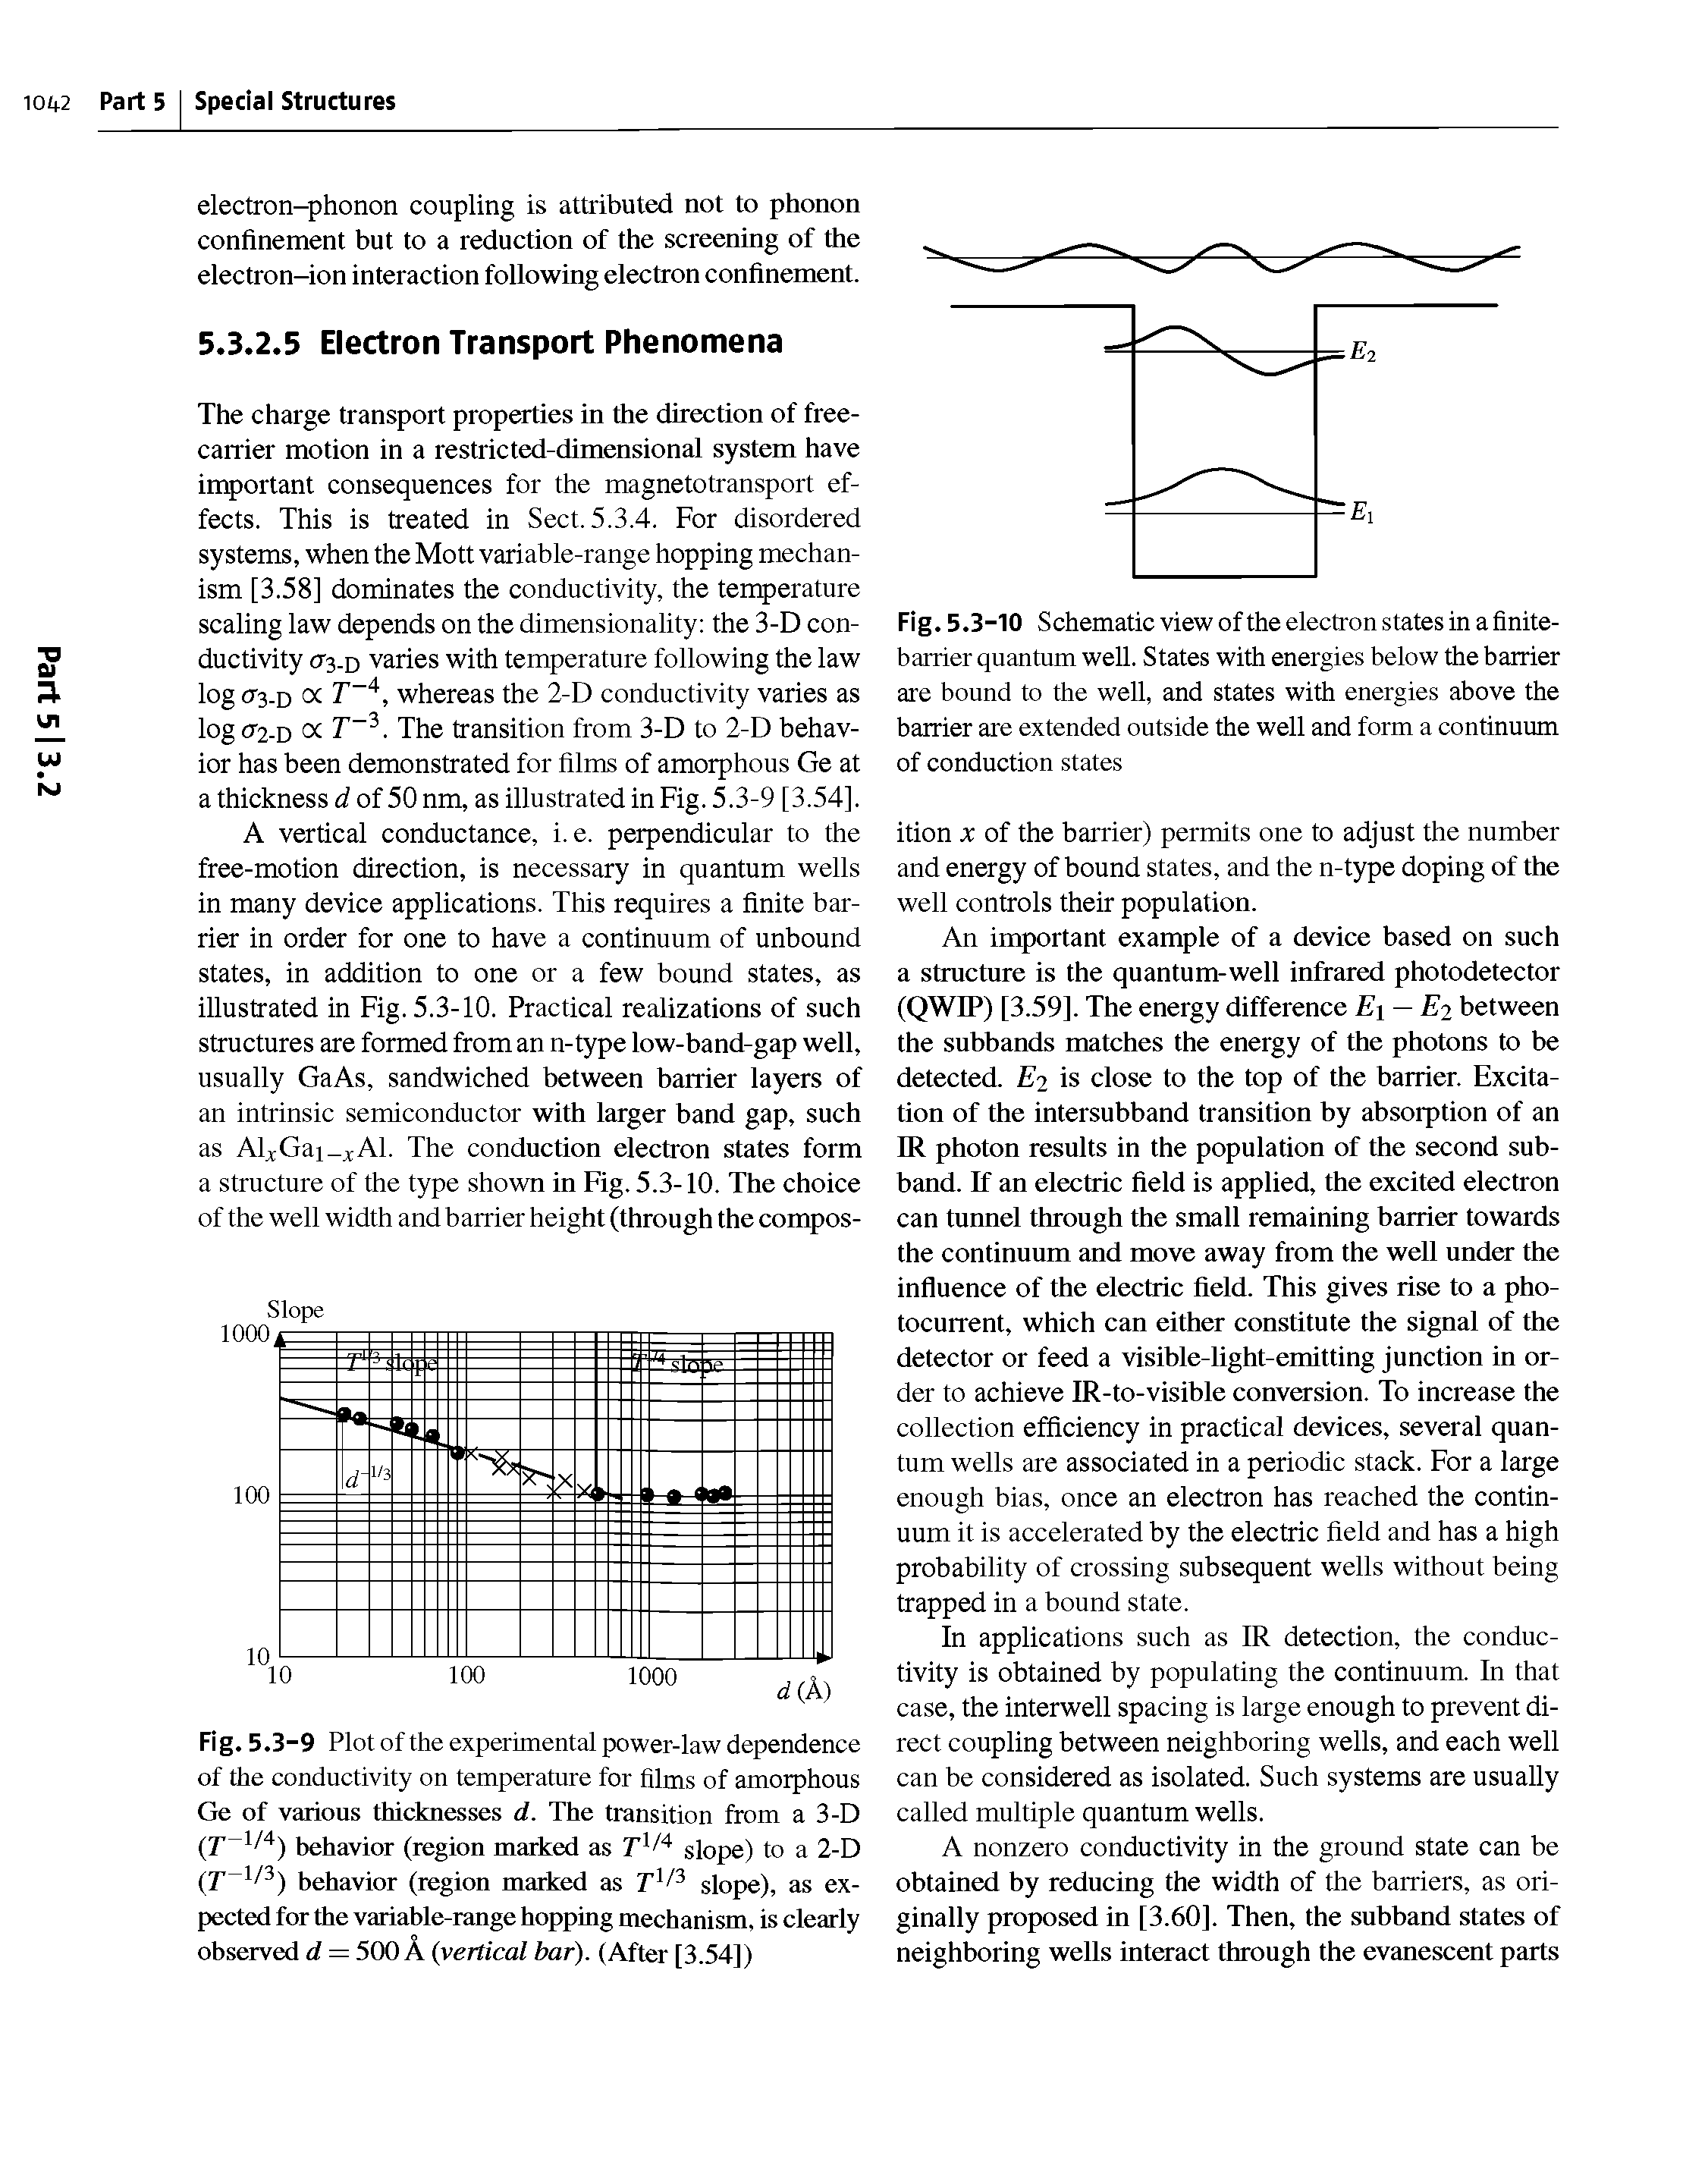 Fig. 5.3-10 Schematic view of the electron states in a finite-barrier quantum weU. States with energies below the barrier are bound to the well, and states with energies above the barrier are extended outside the well and form a continuum of conduction states...